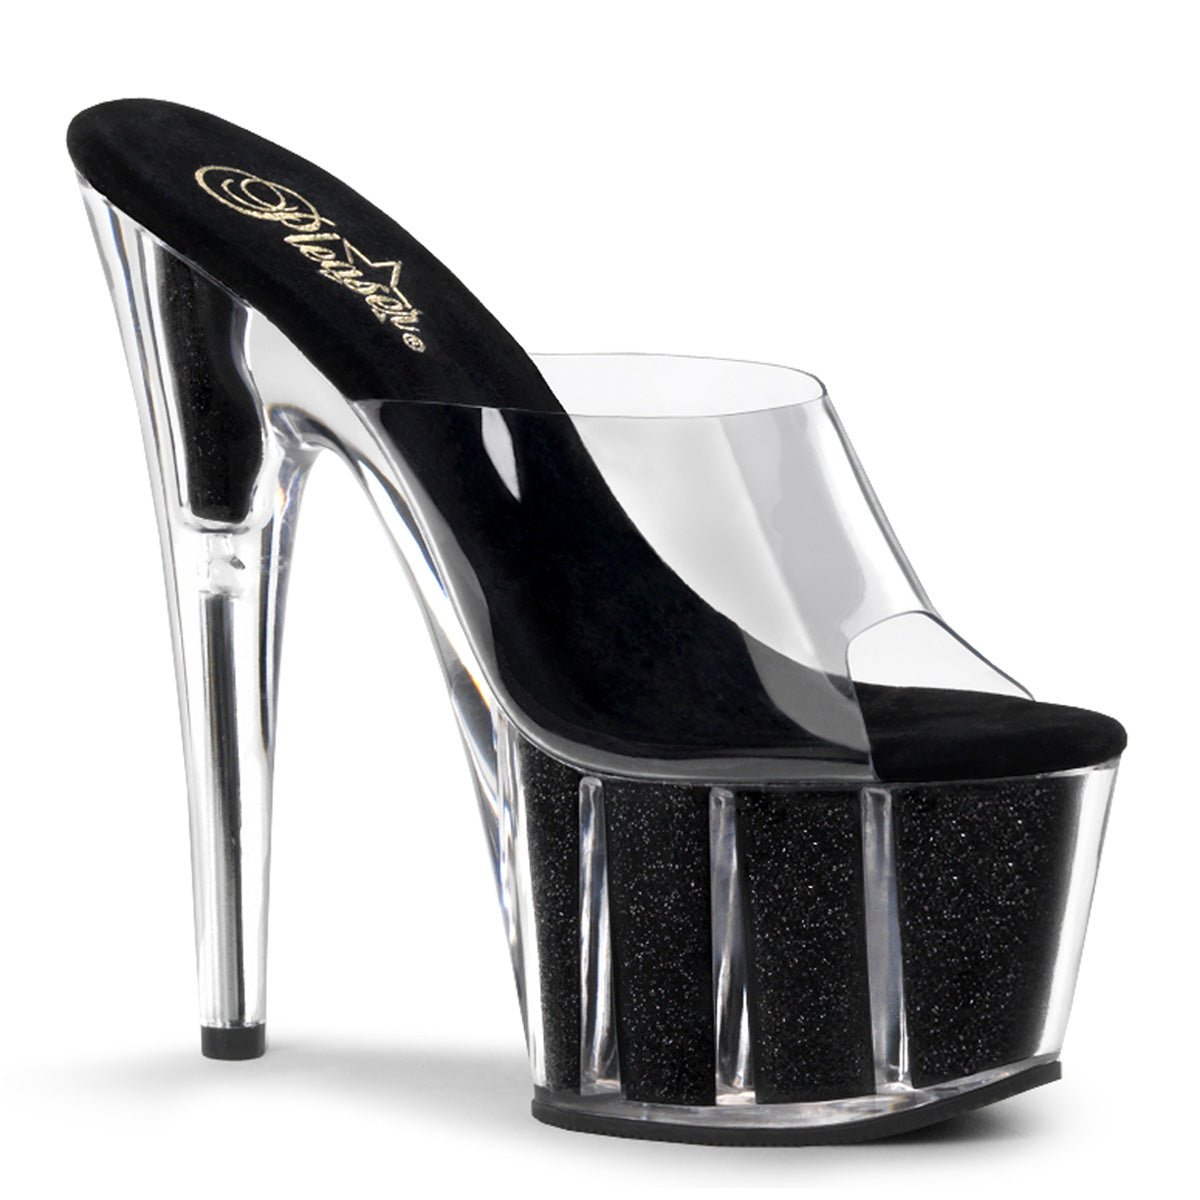 Adore-701G 7 "Heel Clear and Black Glitter Pole Dancer Shoes